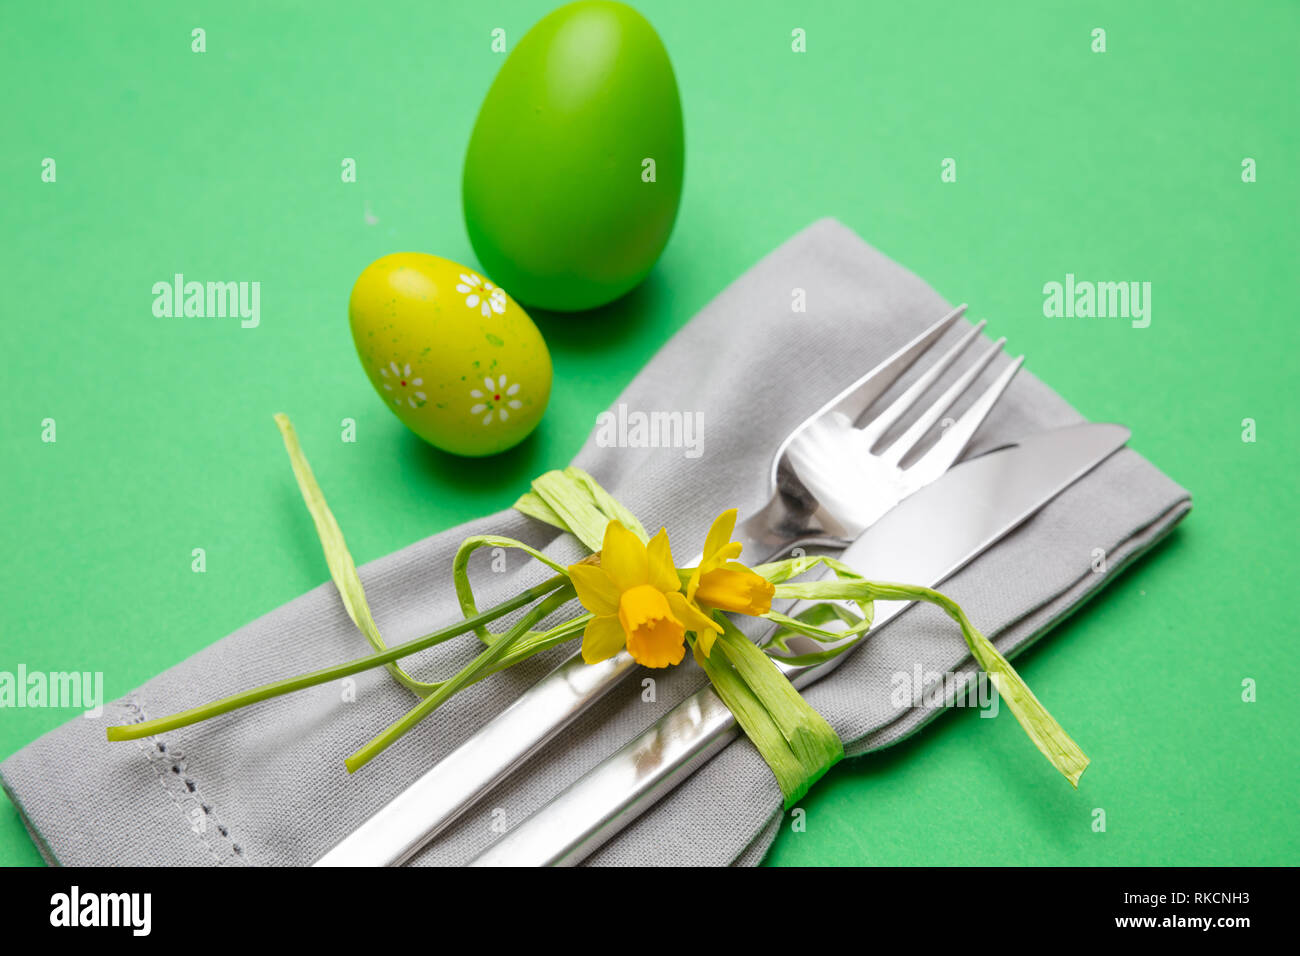 Easter table, place setting. Easter eggs, painted, cutlery and grey napkin, green color background, close up view Stock Photo